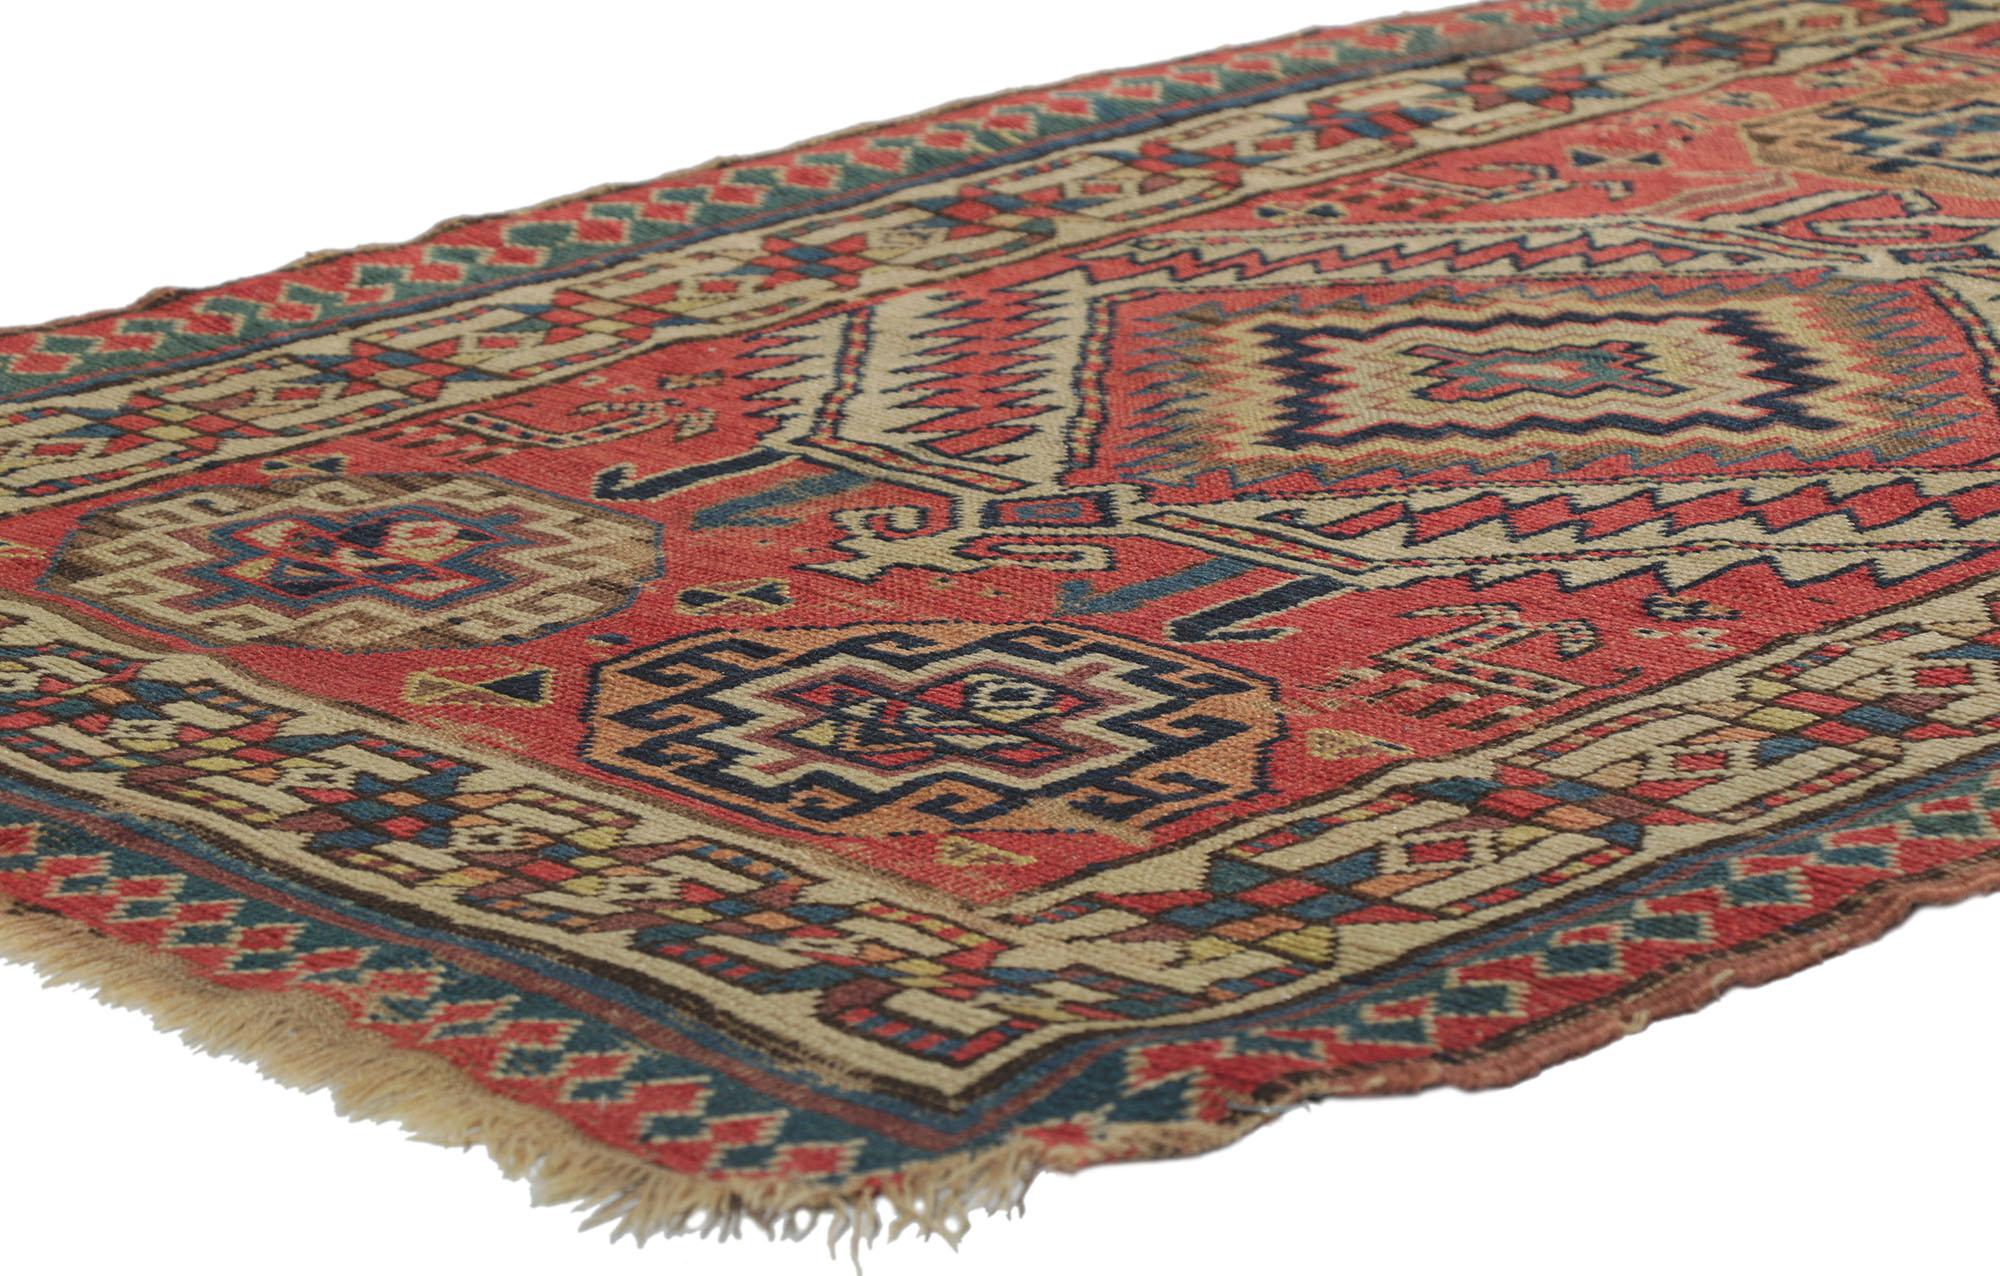 78225 antique Caucasian Kazak Runner, 03'05 x 11'10.
Rendered in variegated shades of red, blue, tan, brown, yellow, mauve, taupe, and light orange with other accent colors. Desirable Age Wear. Abrash. Hand-knotted wool. Made in Caucasus Region